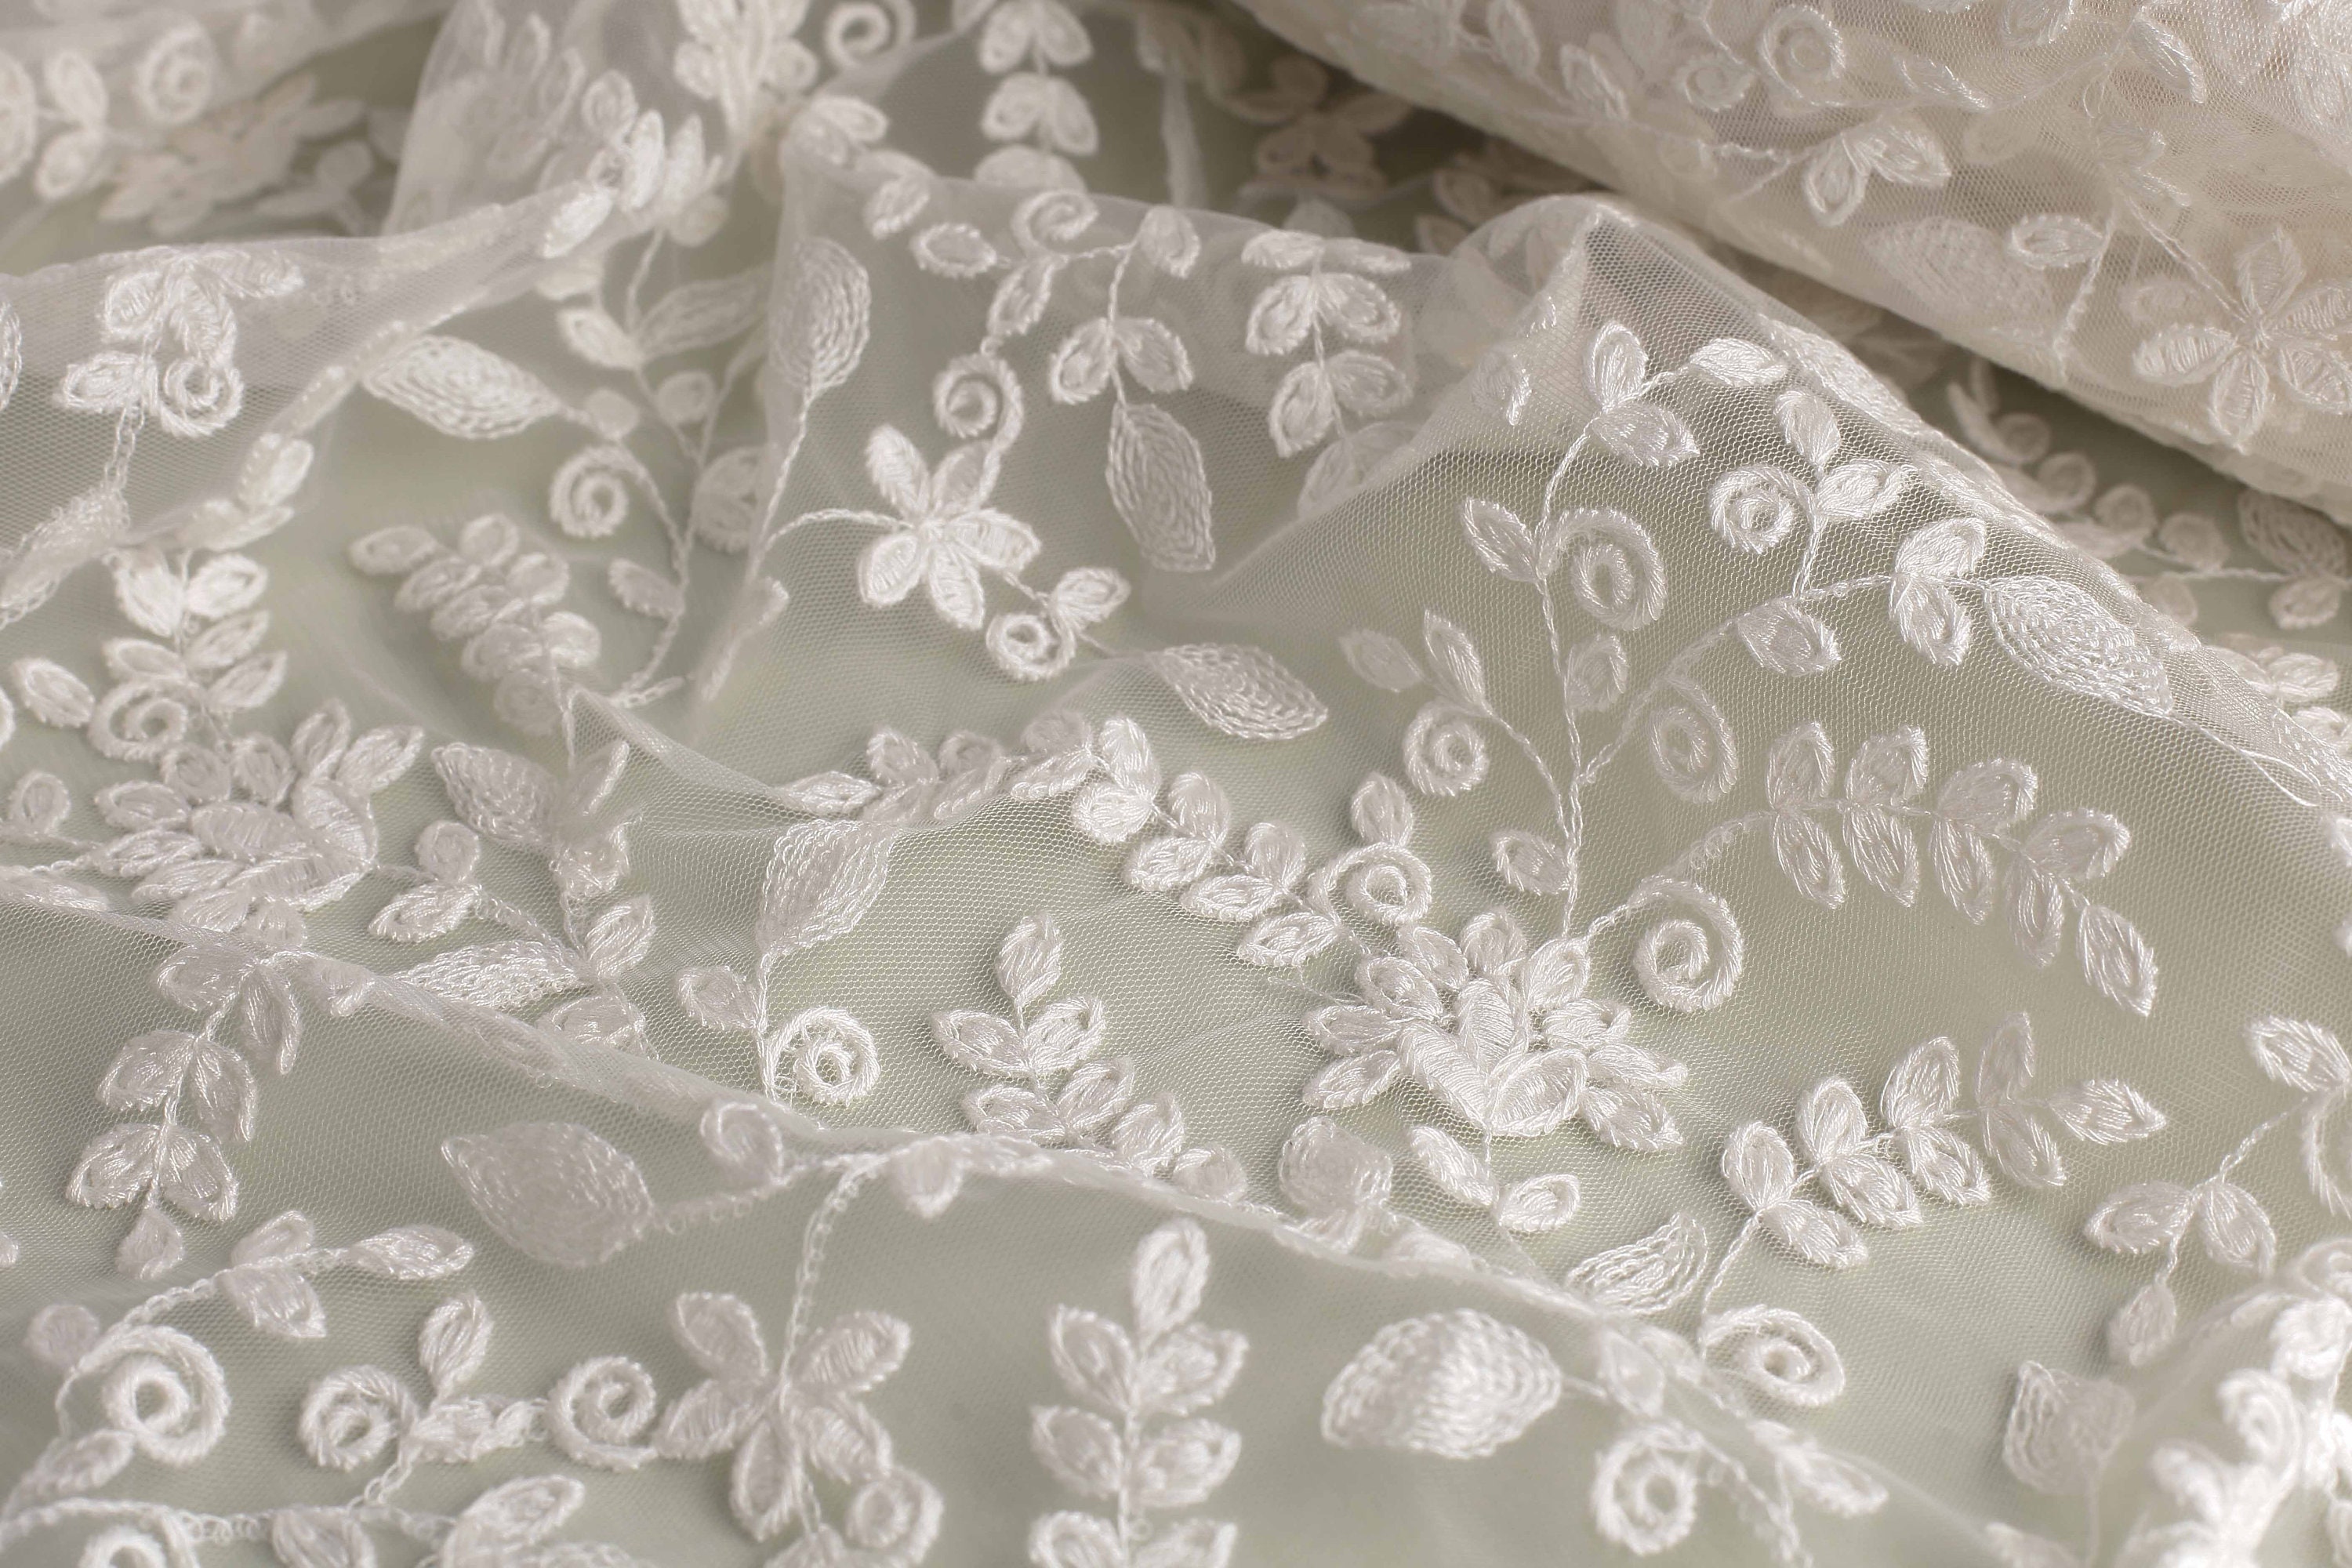 White Net Fabric With Off-white Embroidery, Boho Floral Fabric, Embroidered  Net Fabric, Wedding Dress Fabric 1 Yard 